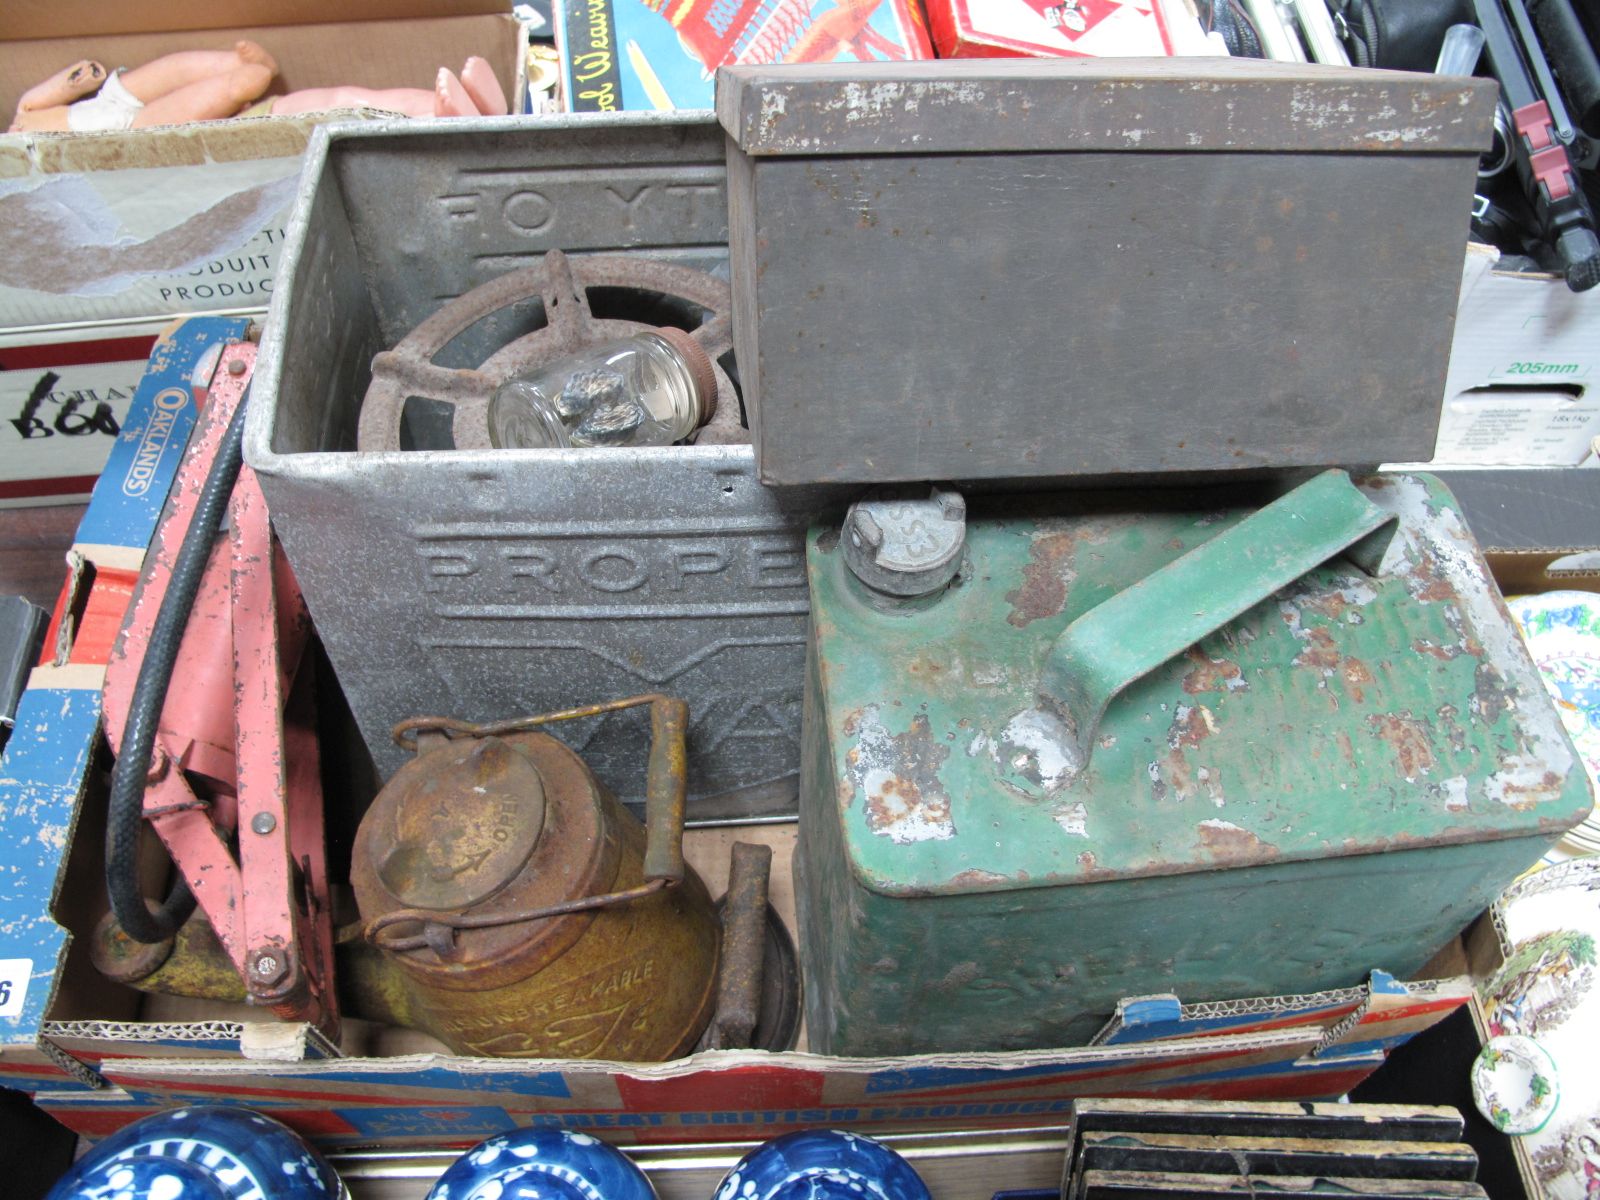 Primus Stove, foot pump, railway paraffin lamp, Wall's advertising tin, Esso petrol canister etc:-